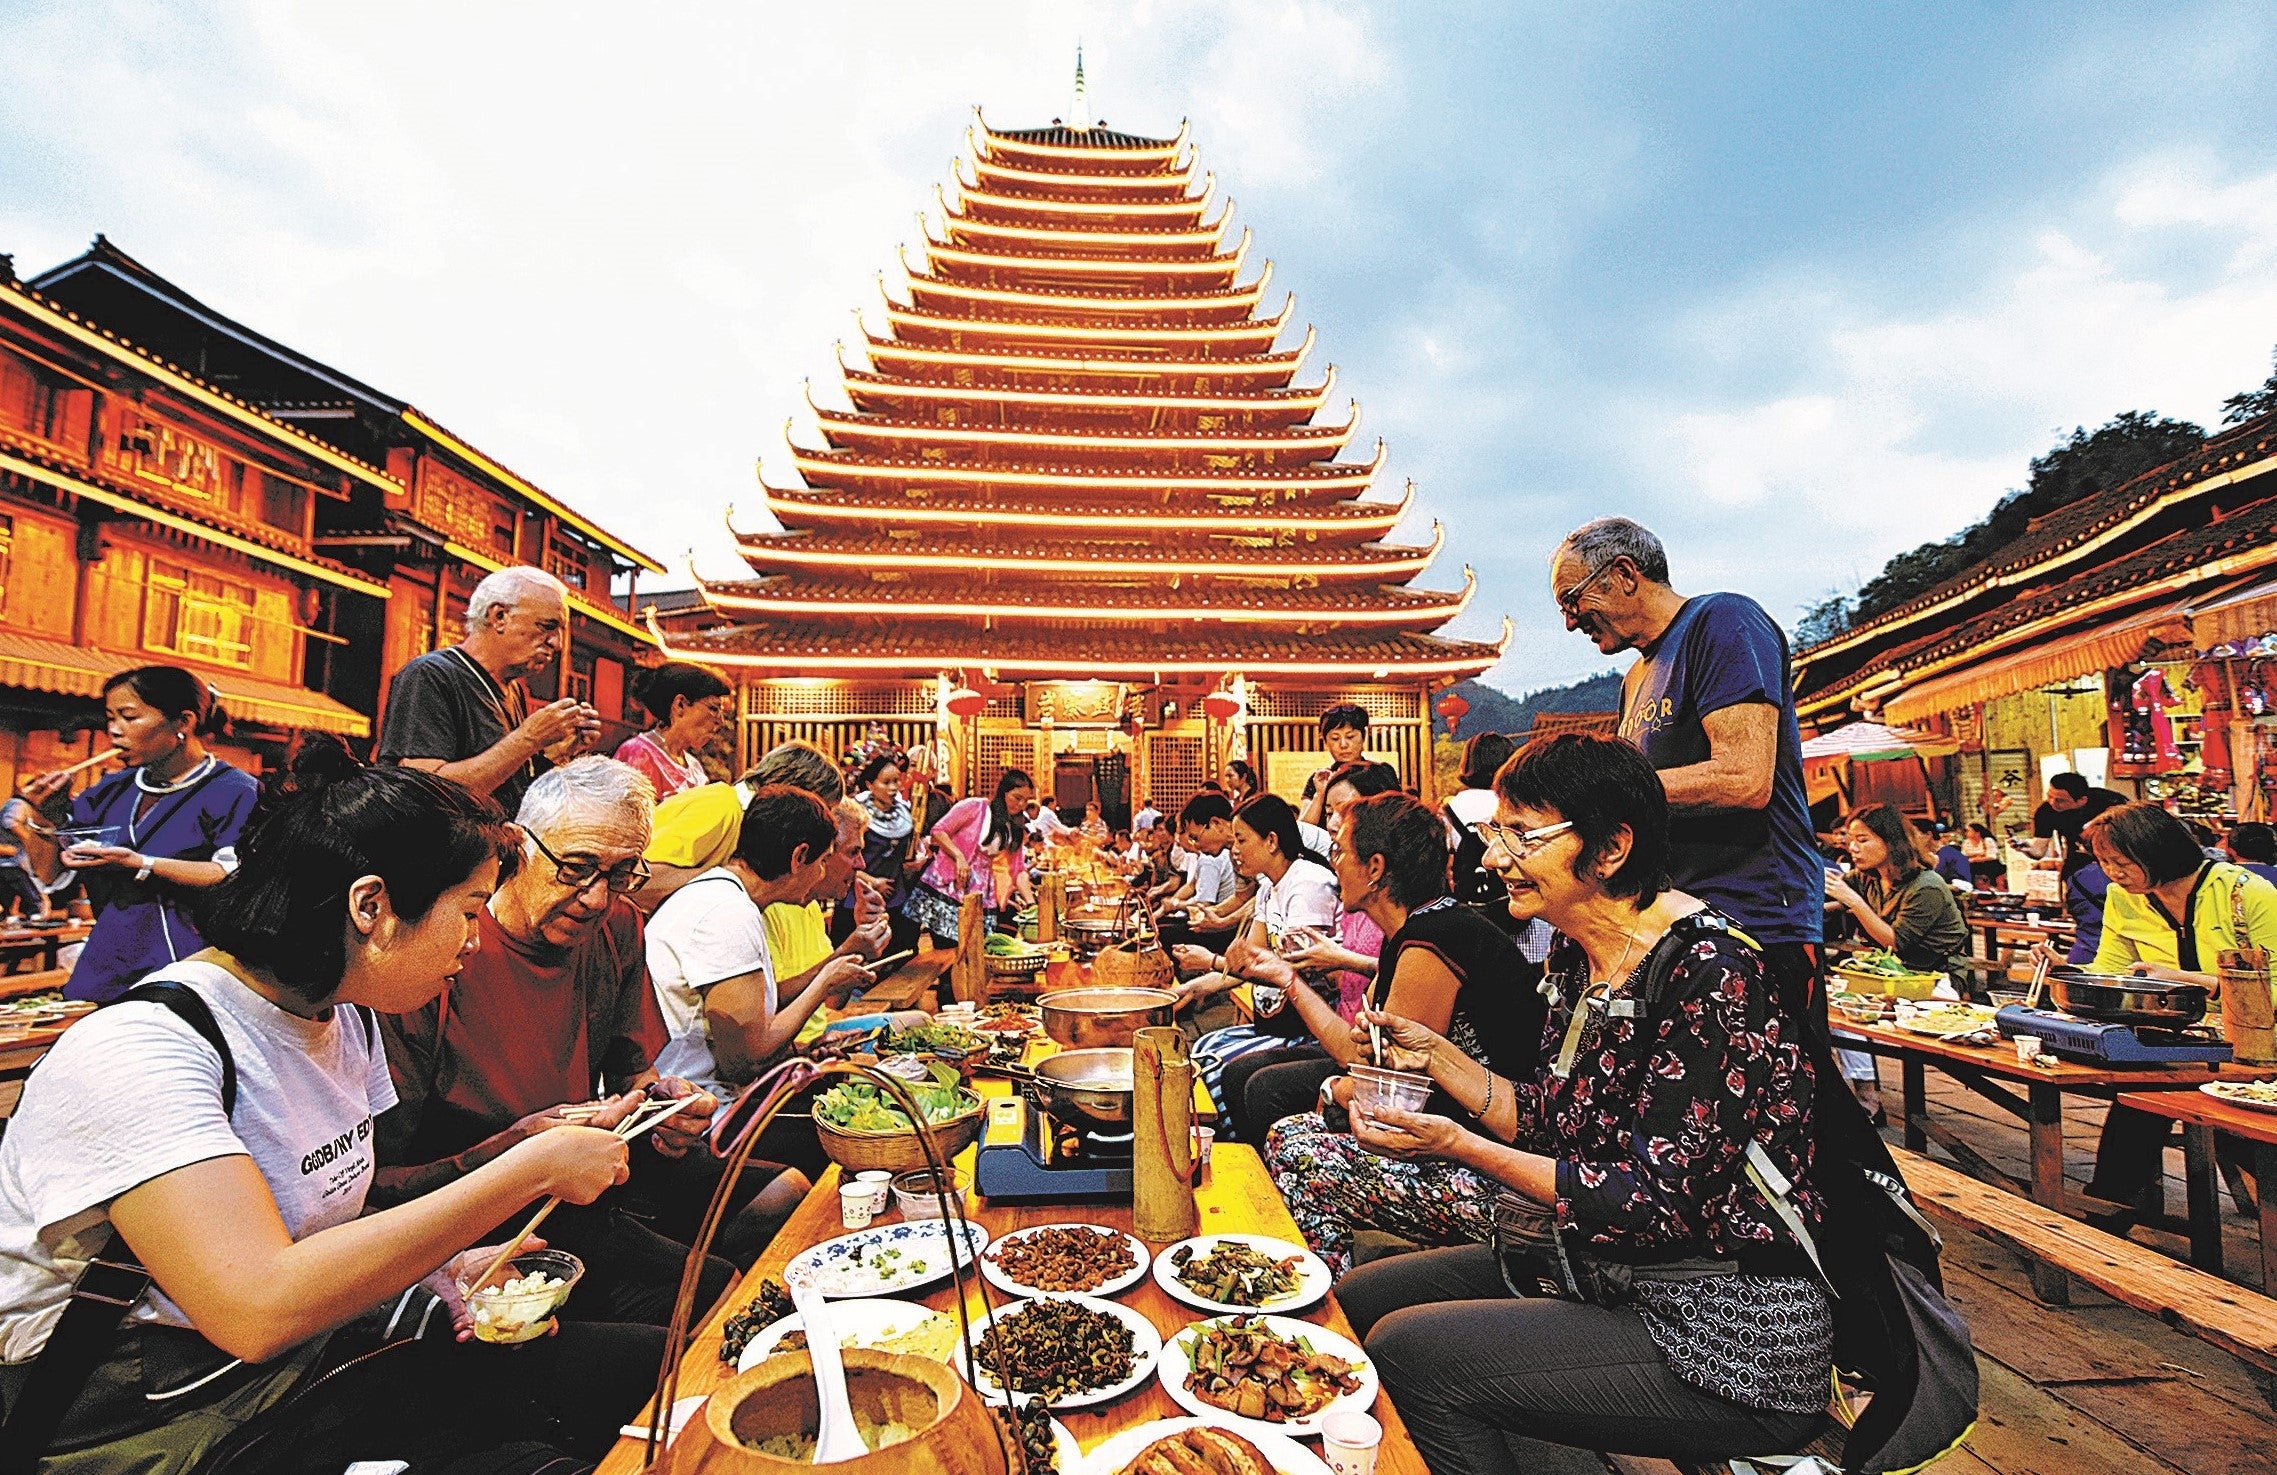 Tourists from home and abroad enjoy traditional Dong food during a festival banquet in April 2019